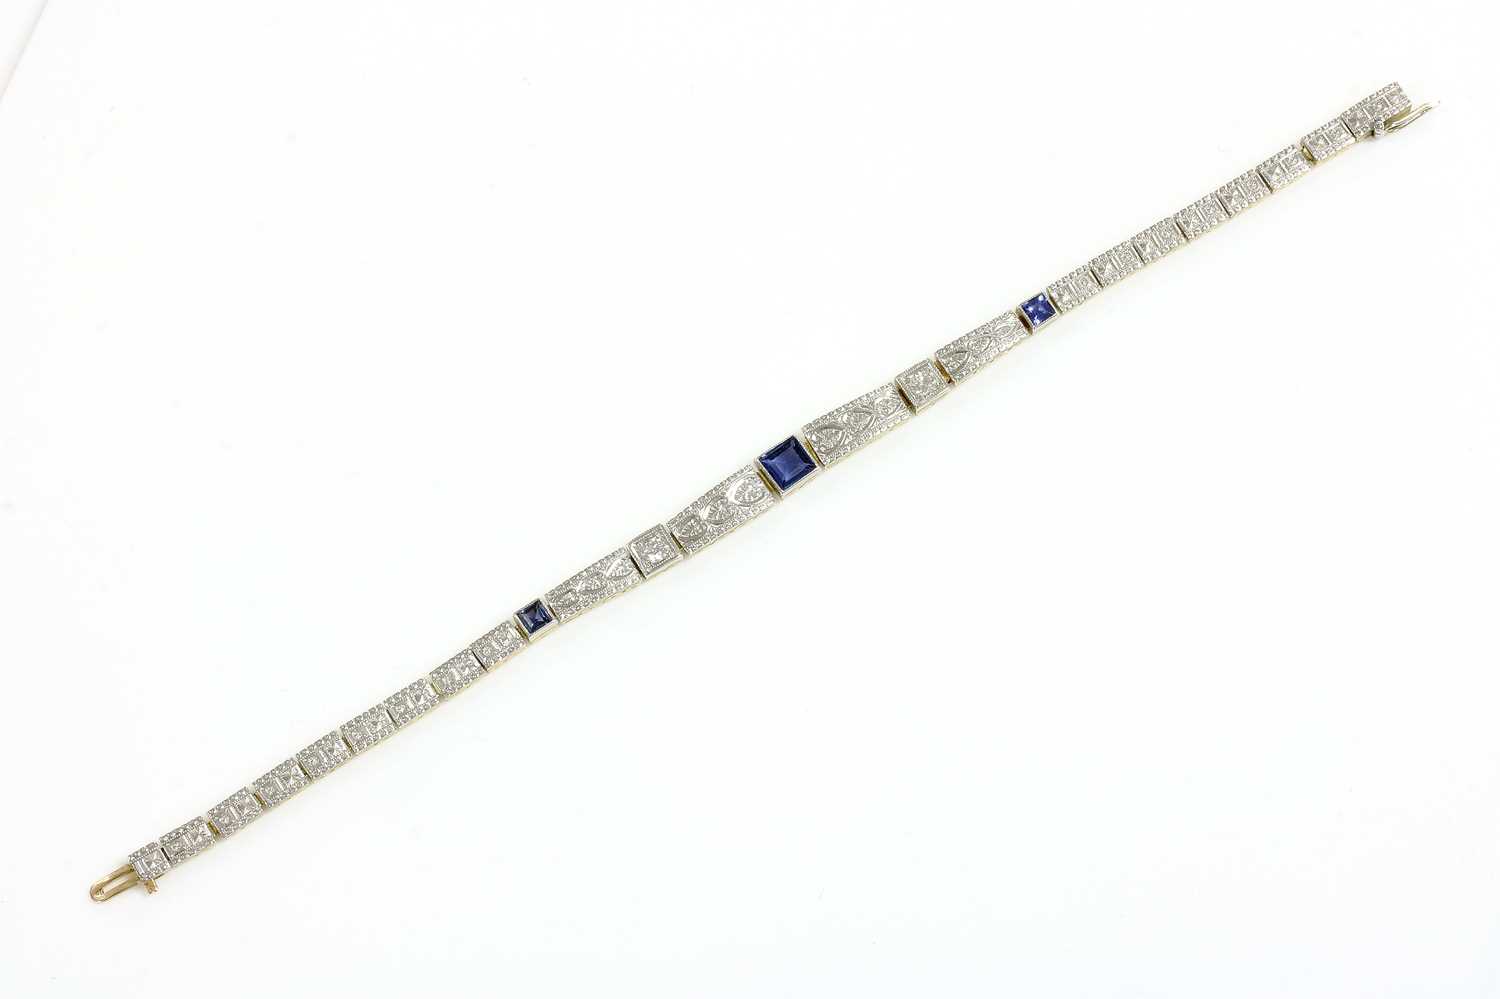 Lot 153 - An American Art Deco synthetic sapphire and diamond bracelet, by Allsopp and Allsop, c.1925